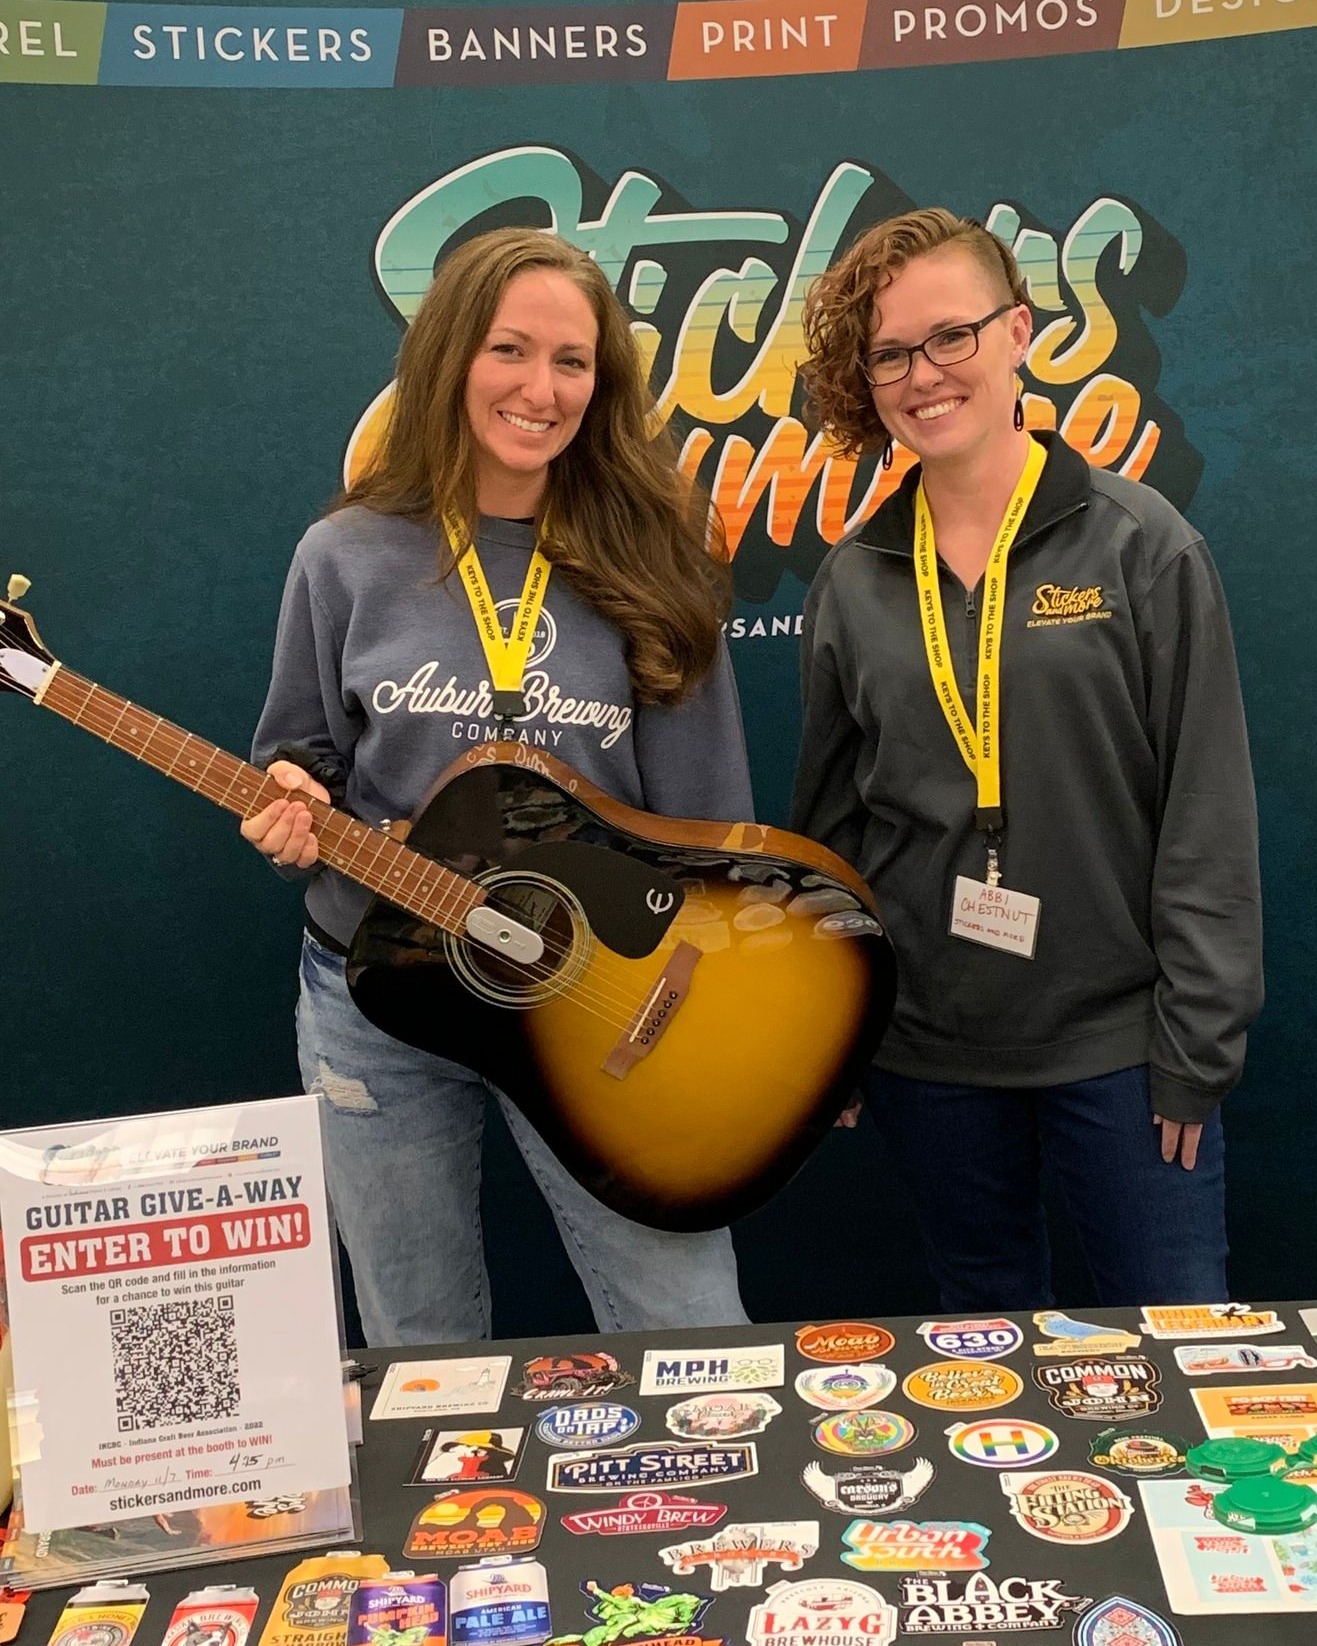 Congrats to Emma the owner of Auburn Brewing Company the guitar winner at the Indiana Craft Brewers Conference in Indianapolis. Check out our website and see how we can help you elevate your brand.
https://stickersandmore.com/brewery/
@auburnbrewingcompany @auburnbrewing Brewers Association @brewersassoc 
#brewlife #brewpub #brewerylife #breweryevents #brewery #funlife